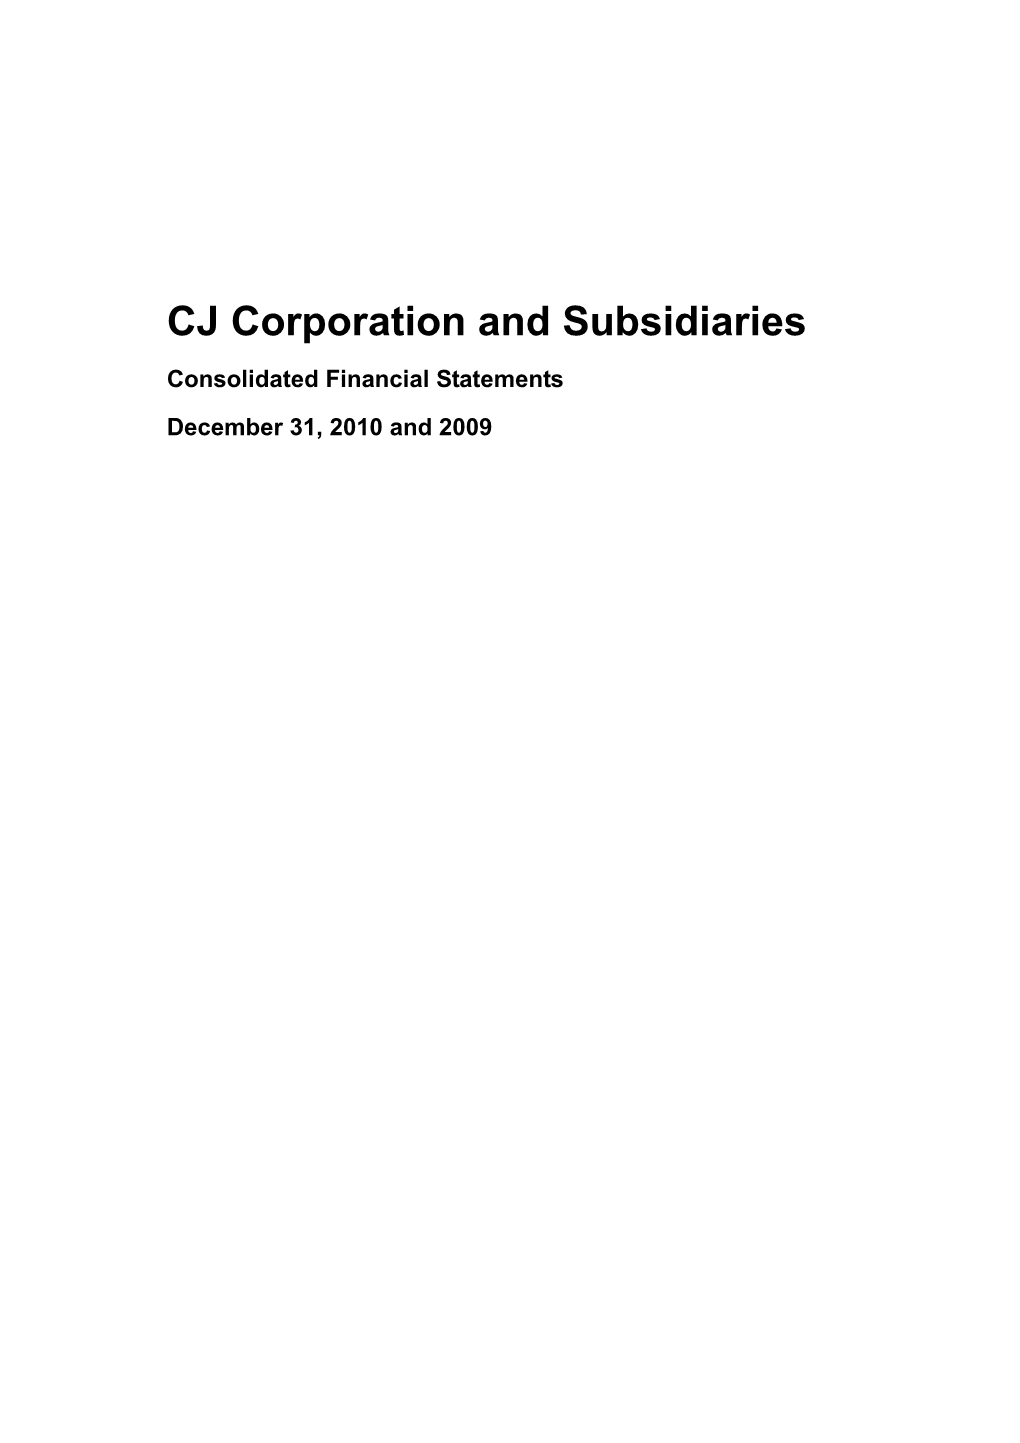 CJ Corporation and Subsidiaries